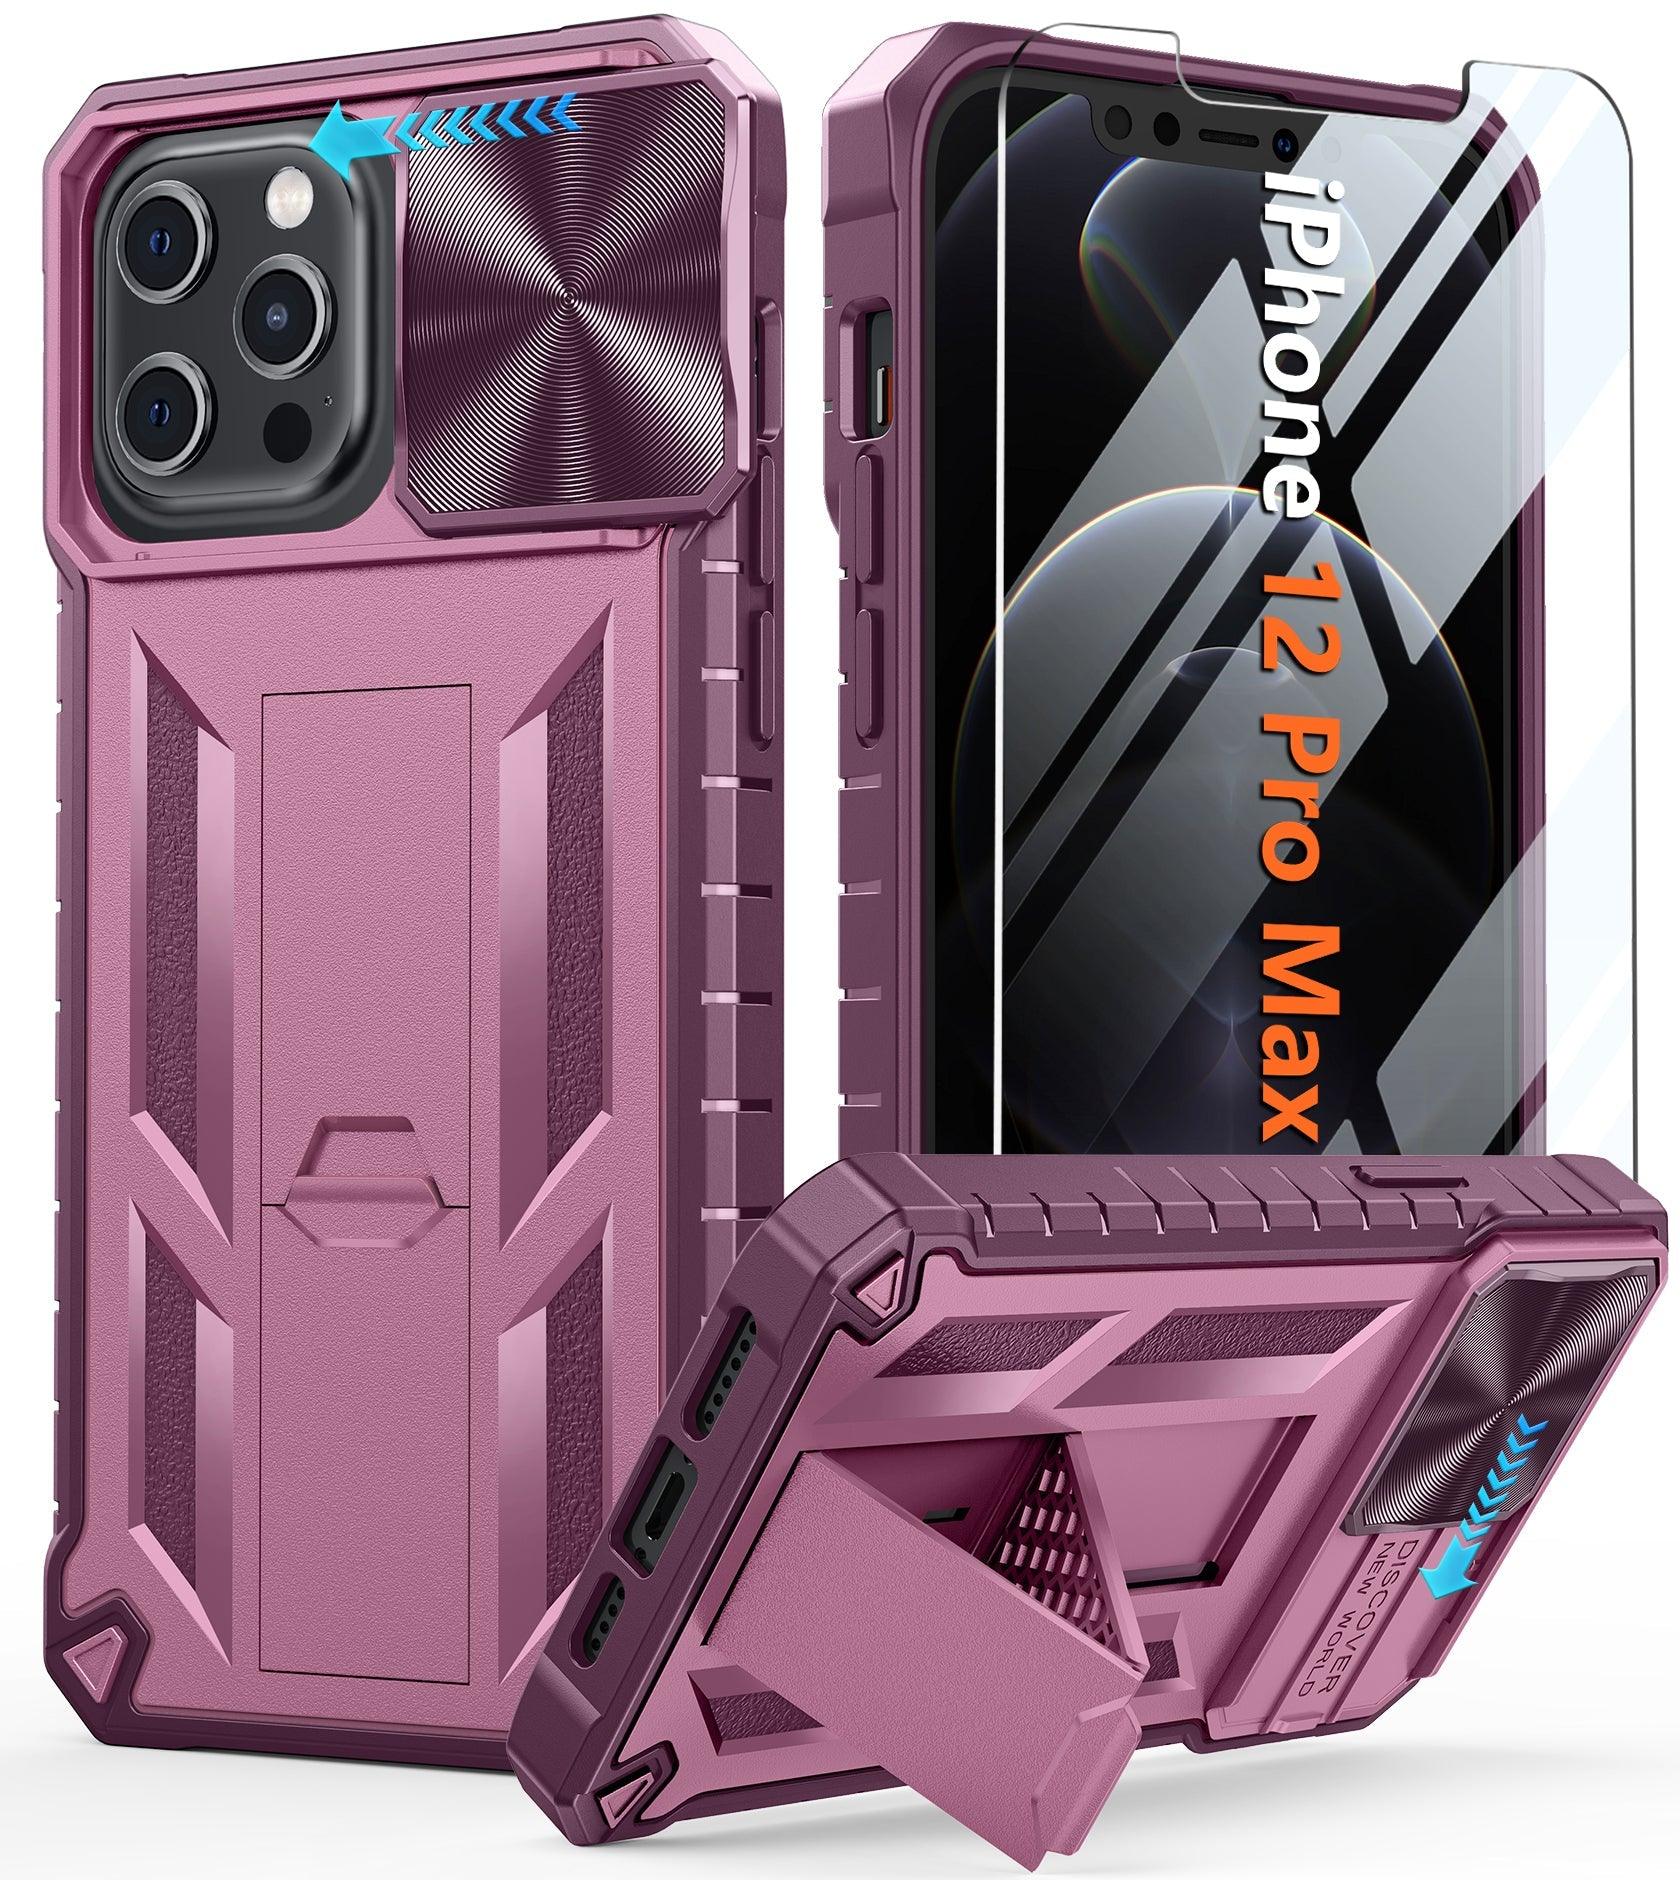 iPhone 12 Pro Max Case: Rugged Military Grade Drop Proof Protection Phone Cover with Slidable Camera Lens Cover and Kickstand - FNTCASE OFFICIAL